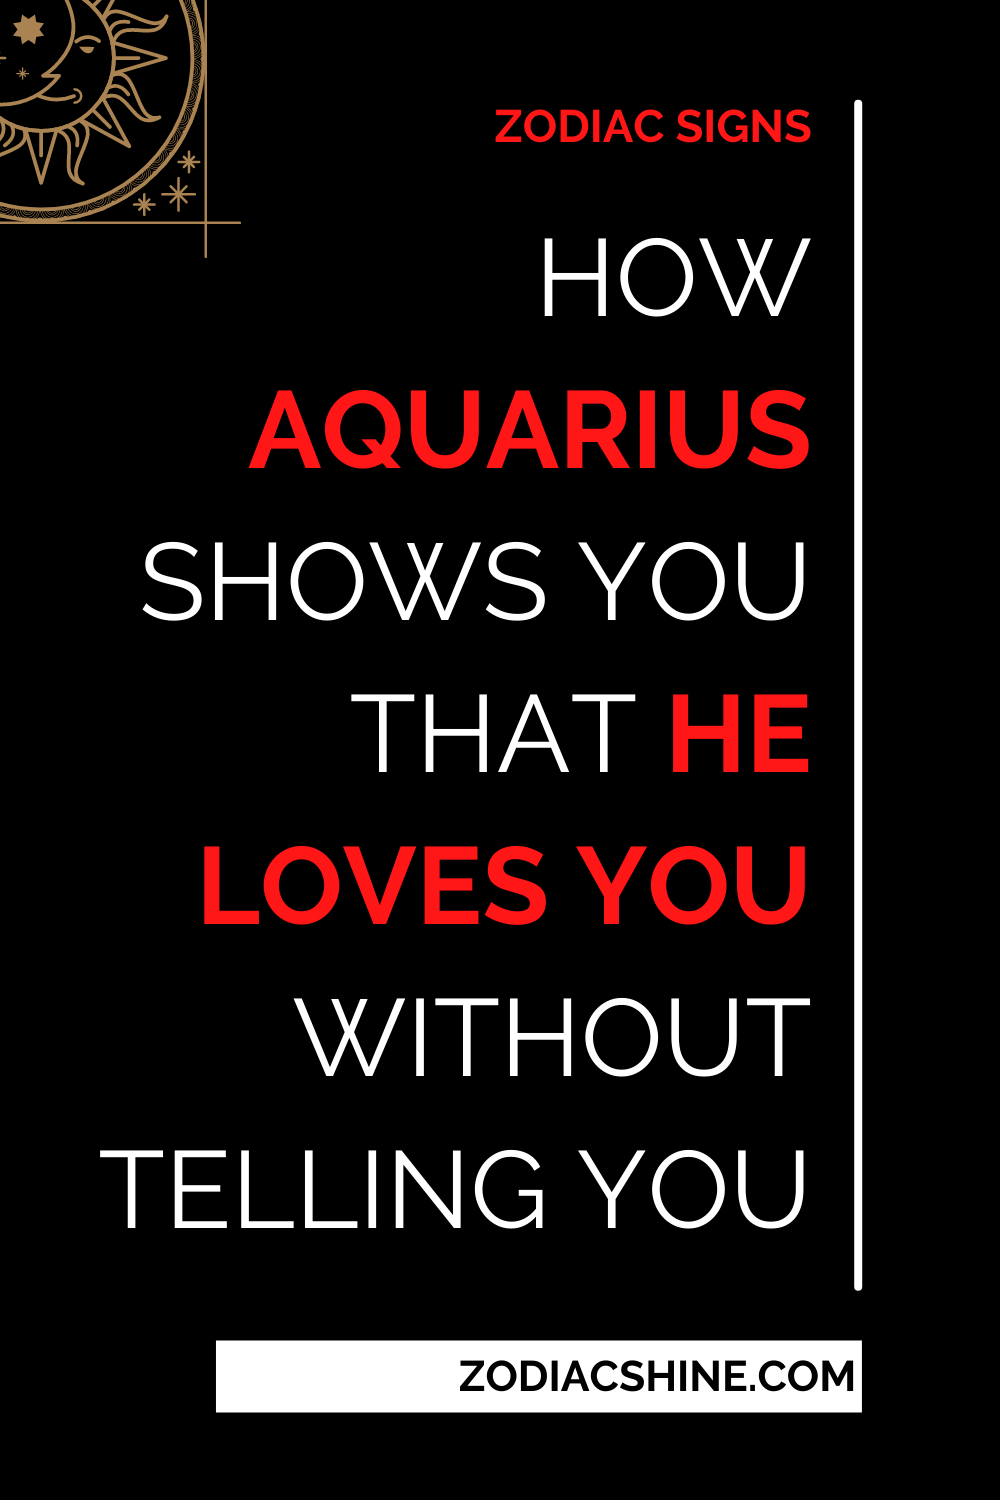 How Aquarius Shows You That He Loves You Without Telling You